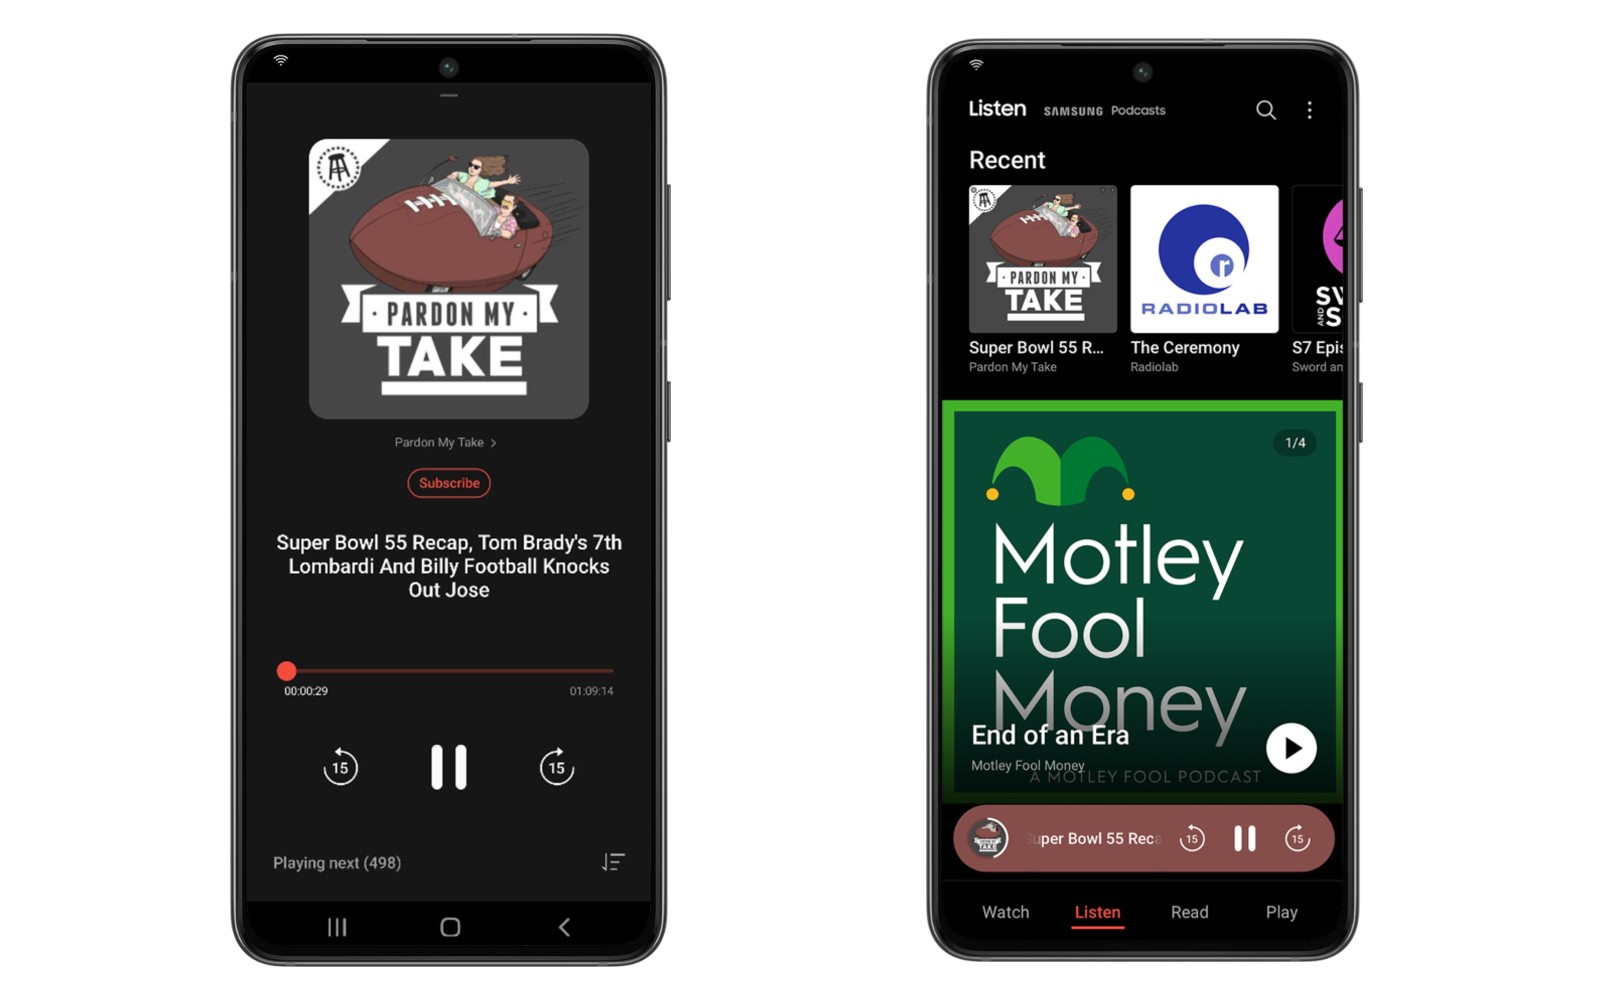 Samsung adds a podcast allotment to its free-entertainment app